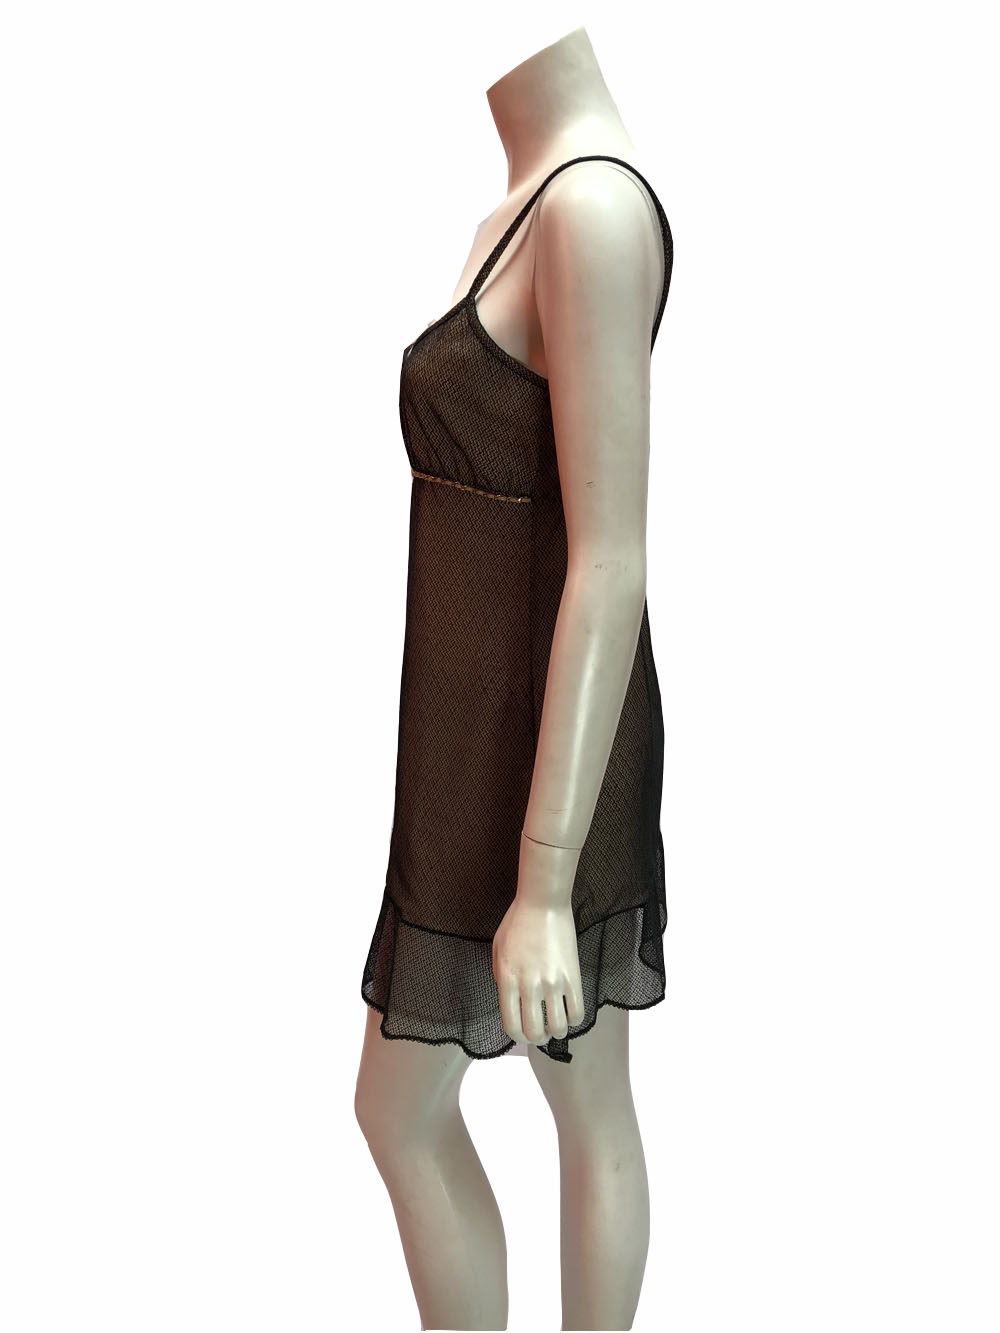 Chanel Nude Slip Dress With Mesh Overlay — Entre Nous Showroom